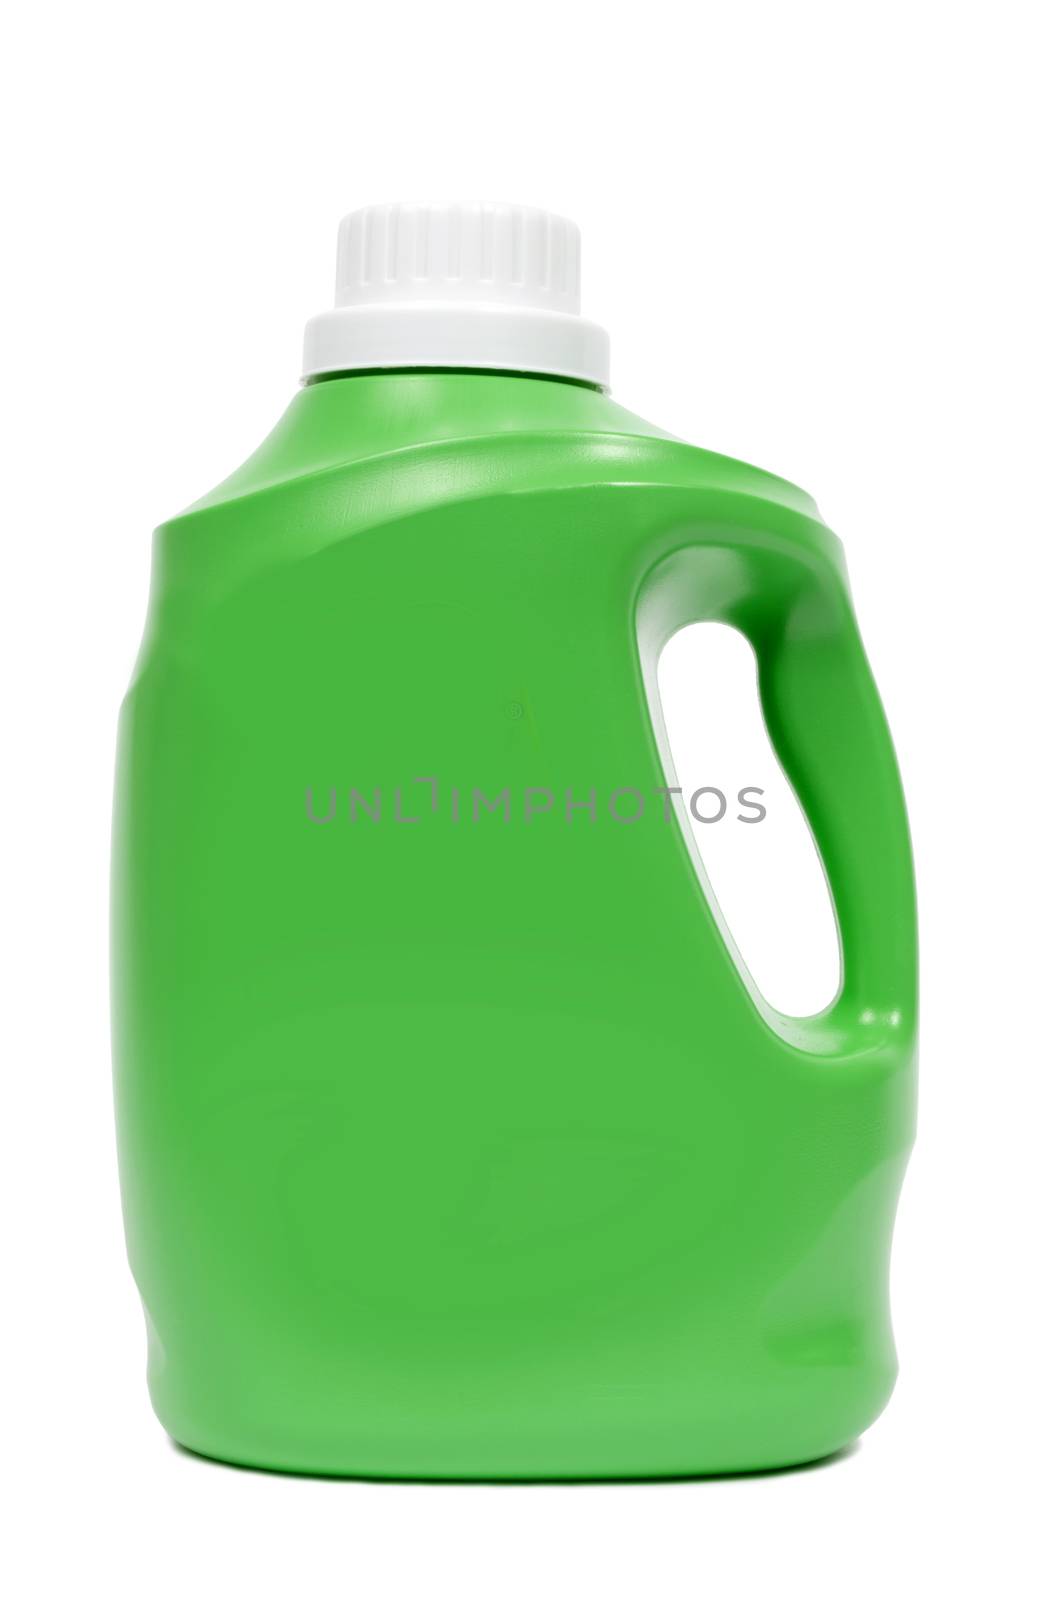 Vertical shot of green detergent container on white background with blank front for your copy.